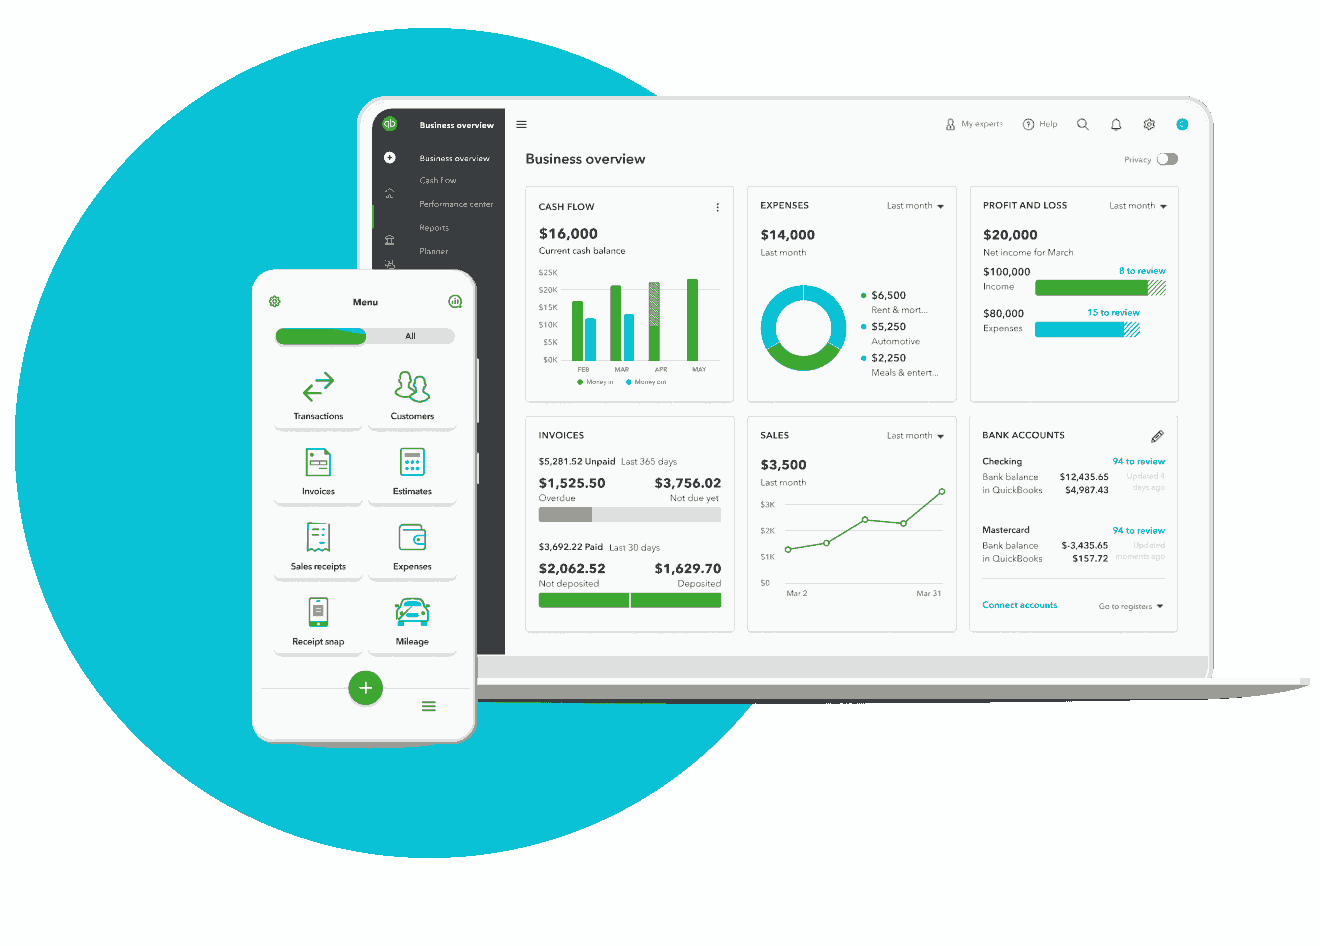 An illustration showing a mobile phone displaying the QuickBooks app Quick Action buttons. Behind the mobile phone is an open laptop displaying the QuickBooks Online business overview dashboard.